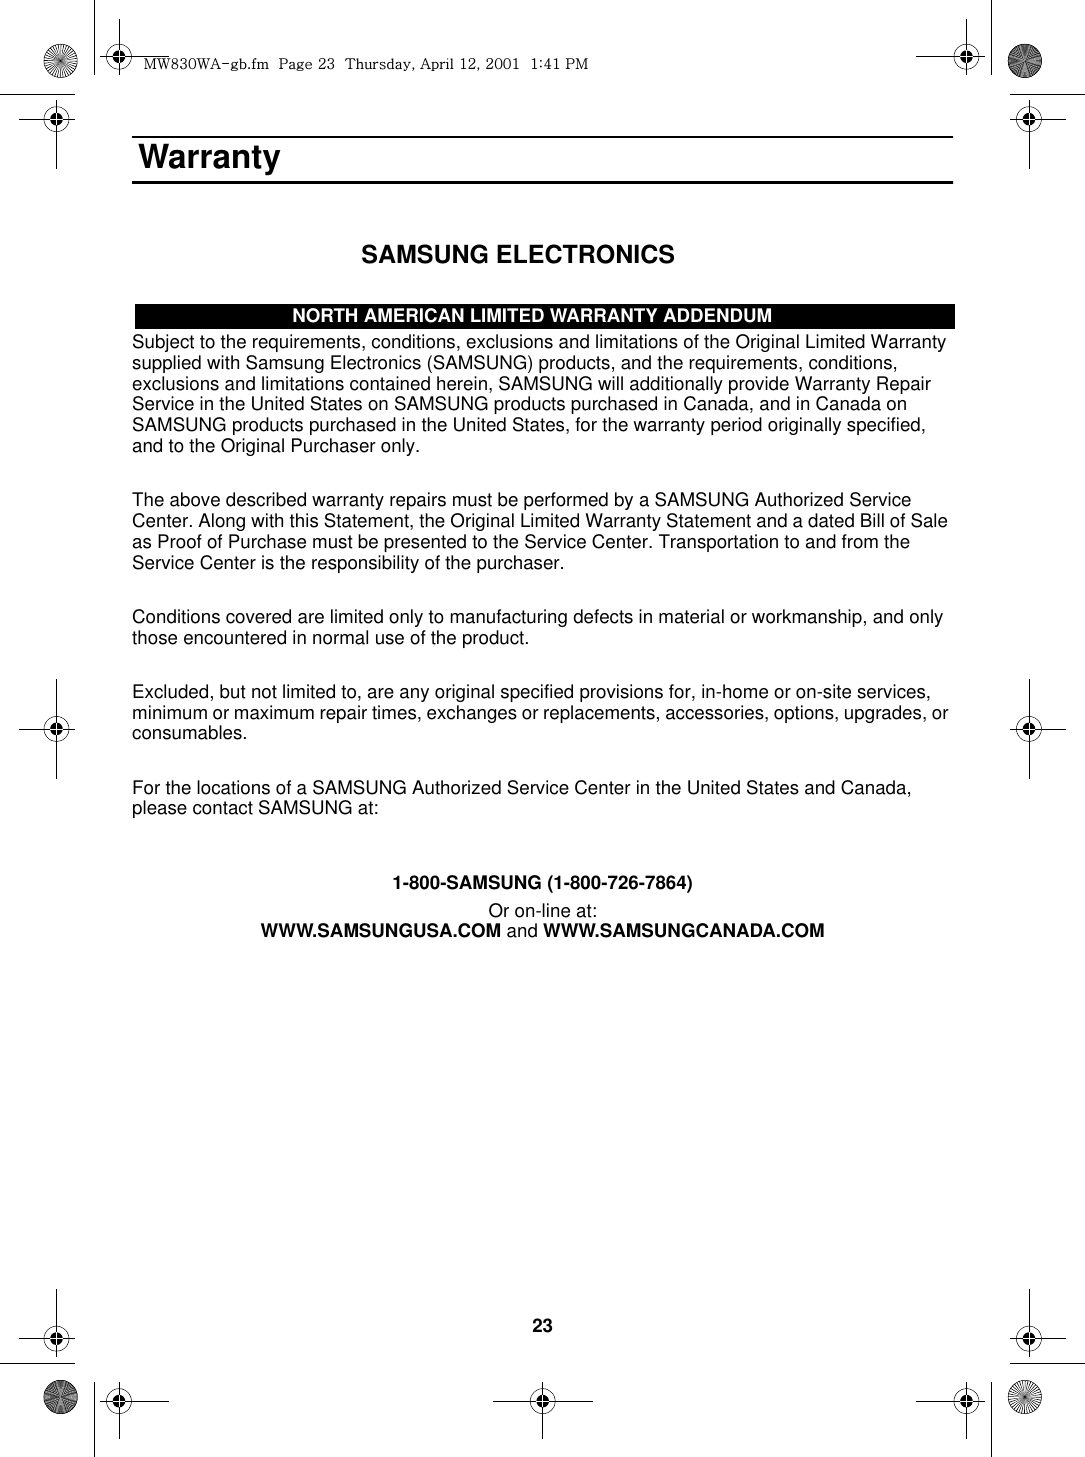 23 Warranty                                 SAMSUNG ELECTRONICSNOR TH AMERICAN LIMITED WARRANTY ADDENDUMSubject to the requirements, conditions, exclusions and limitations of the Original Limited Warranty supplied with Samsung Electronics (SAMSUNG) products, and the requirements, conditions, exclusions and limitations contained herein, SAMSUNG will additionally provide Warranty Repair Service in the United States on SAMSUNG products purchased in Canada, and in Canada on SAMSUNG products purchased in the United States, for the warranty period originally specified, and to the Original Purchaser only.The above described warranty repairs must be performed by a SAMSUNG Authorized Service Center. Along with this Statement, the Original Limited Warranty Statement and a dated Bill of Sale as Proof of Purchase must be presented to the Service Center. Transportation to and from the Service Center is the responsibility of the purchaser.Conditions covered are limited only to manufacturing defects in material or workmanship, and only those encountered in normal use of the product.Excluded, but not limited to, are any original specified provisions for, in-home or on-site services, minimum or maximum repair times, exchanges or replacements, accessories, options, upgrades, or consumables.For the locations of a SAMSUNG Authorized Service Center in the United States and Canada, please contact SAMSUNG at:1-800-SAMSUNG (1-800-726-7864)Or on-line at:WWW.SAMSUNGUSA.COM and WWW.SAMSUNGCANADA.COMNORTH AMERICAN LIMITED WARRANTY ADDENDUMt~_ZW~hTUGGwGYZGG{SGhGXYSGYWWXGGXa[XGwt